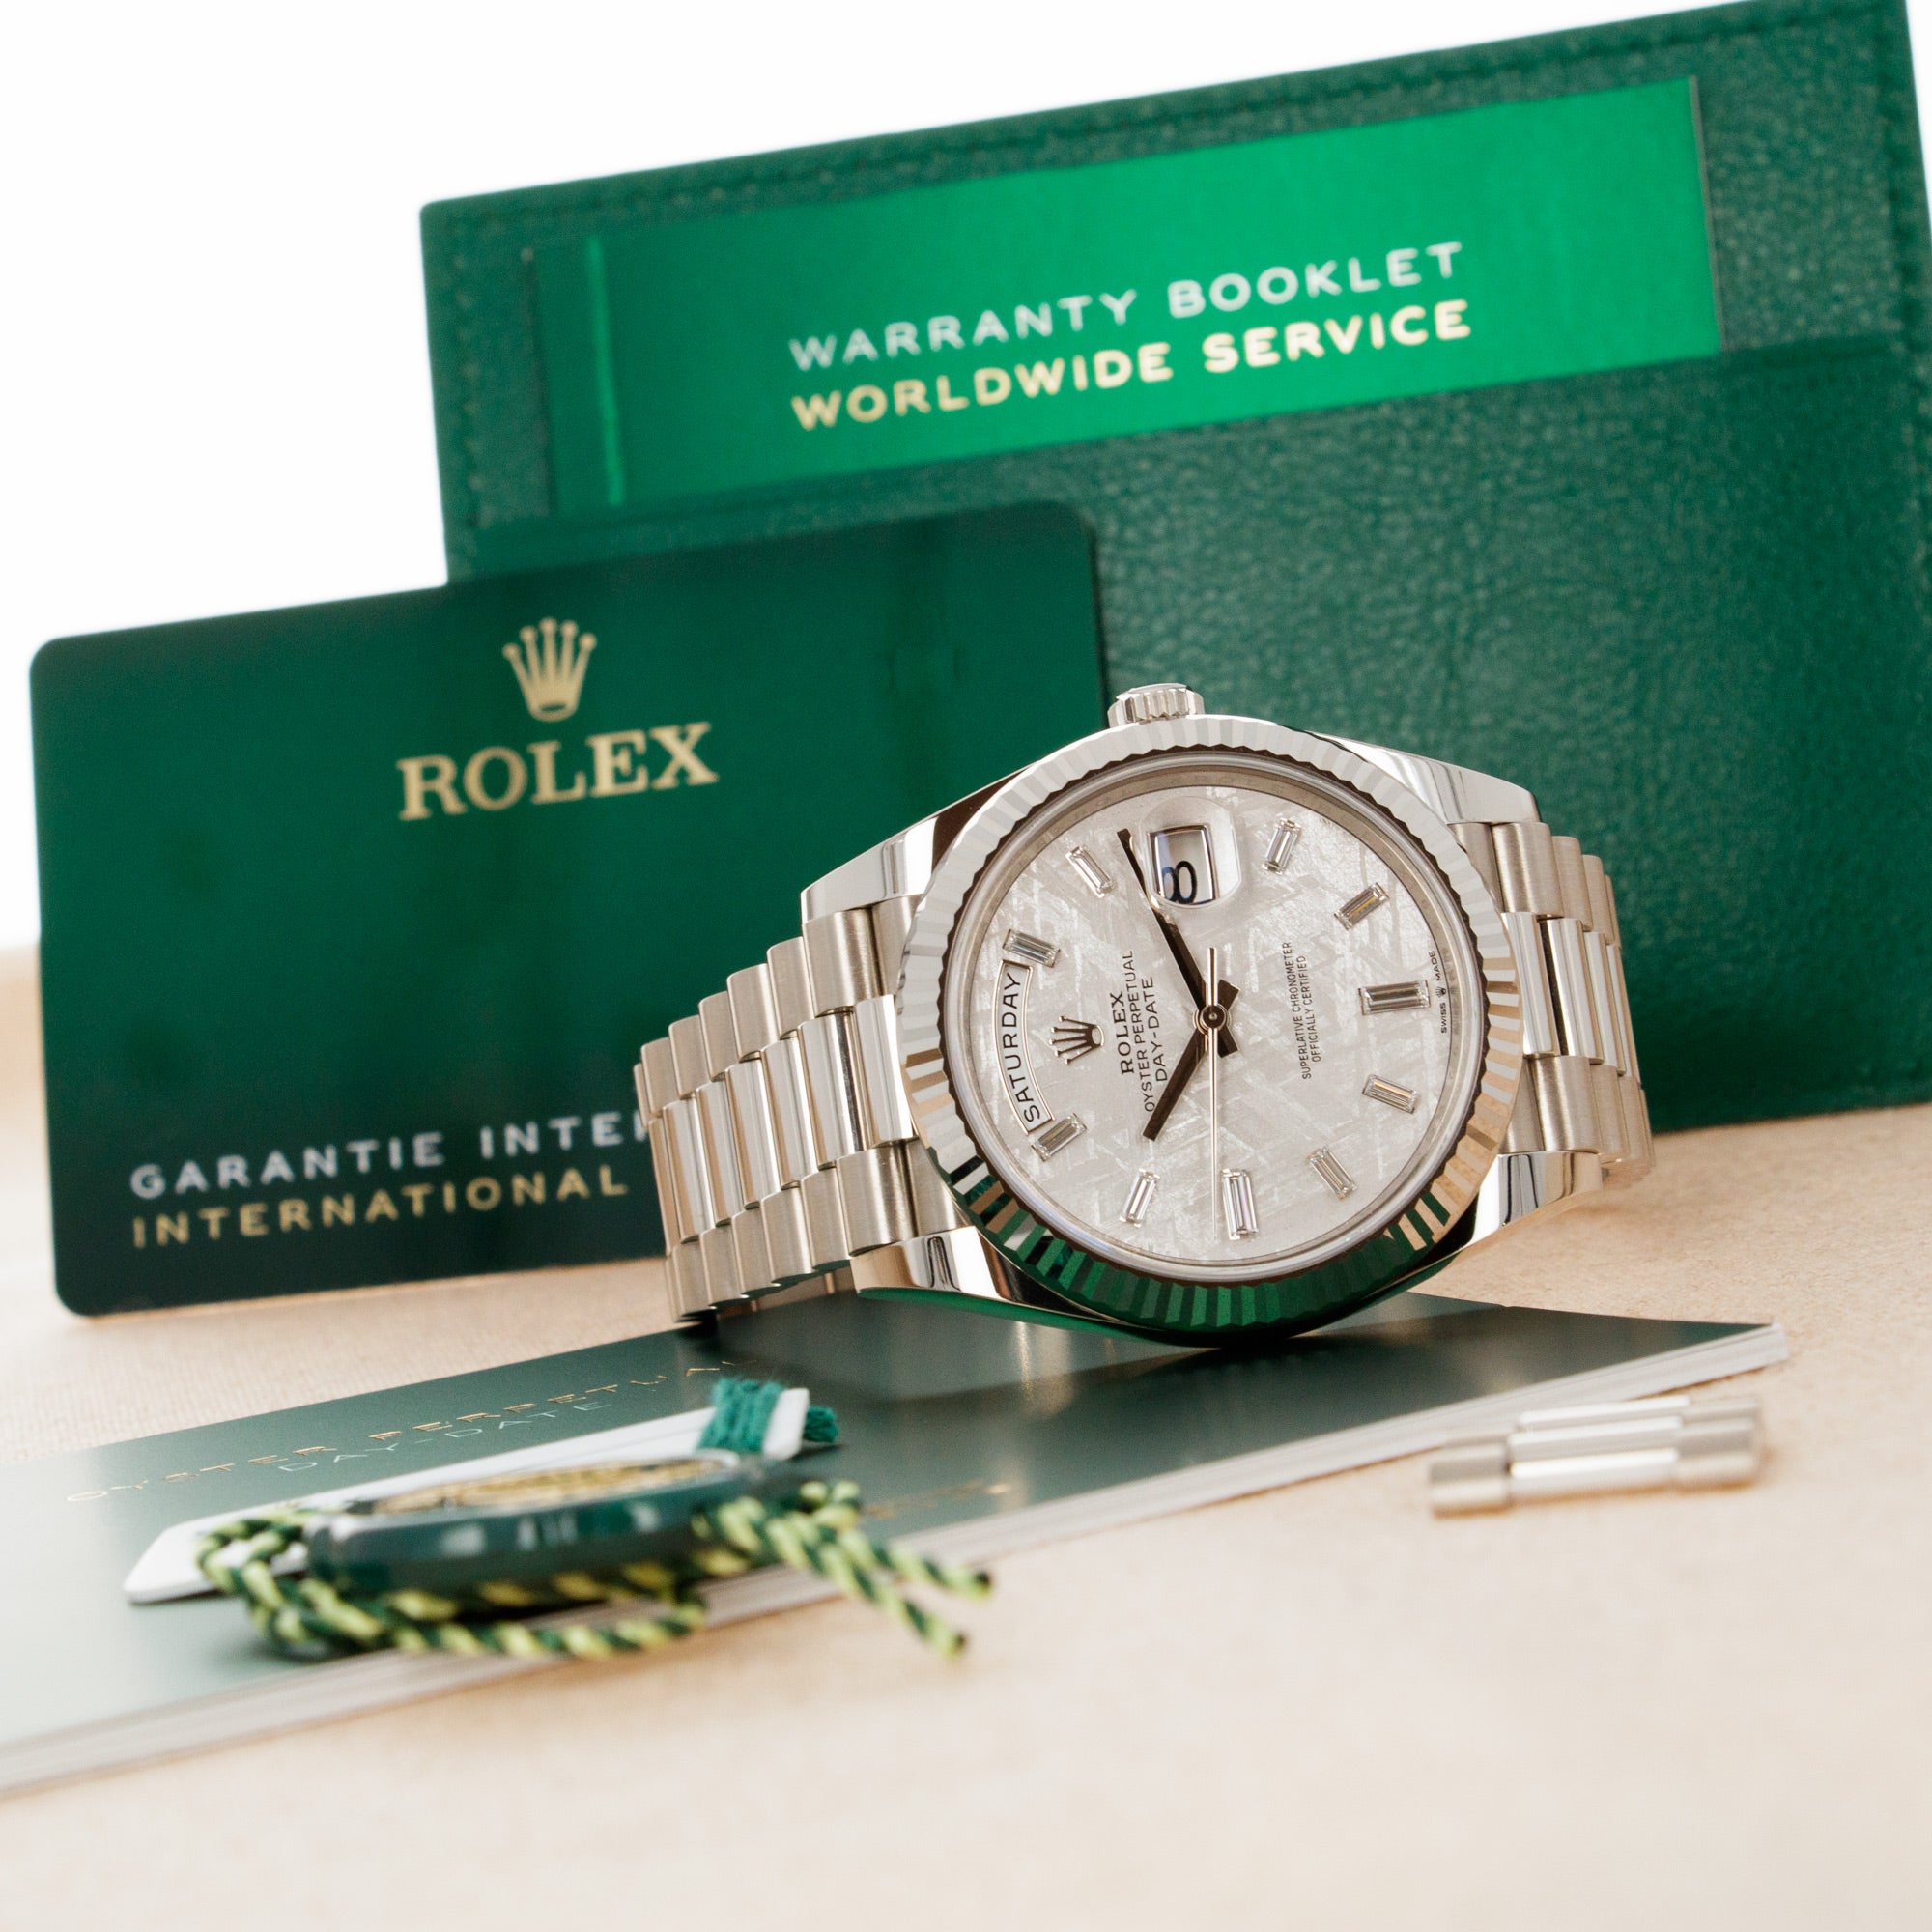 Rolex - Rolex Day-Date White Gold Ref. 228239 with Meteorite Dial - The Keystone Watches